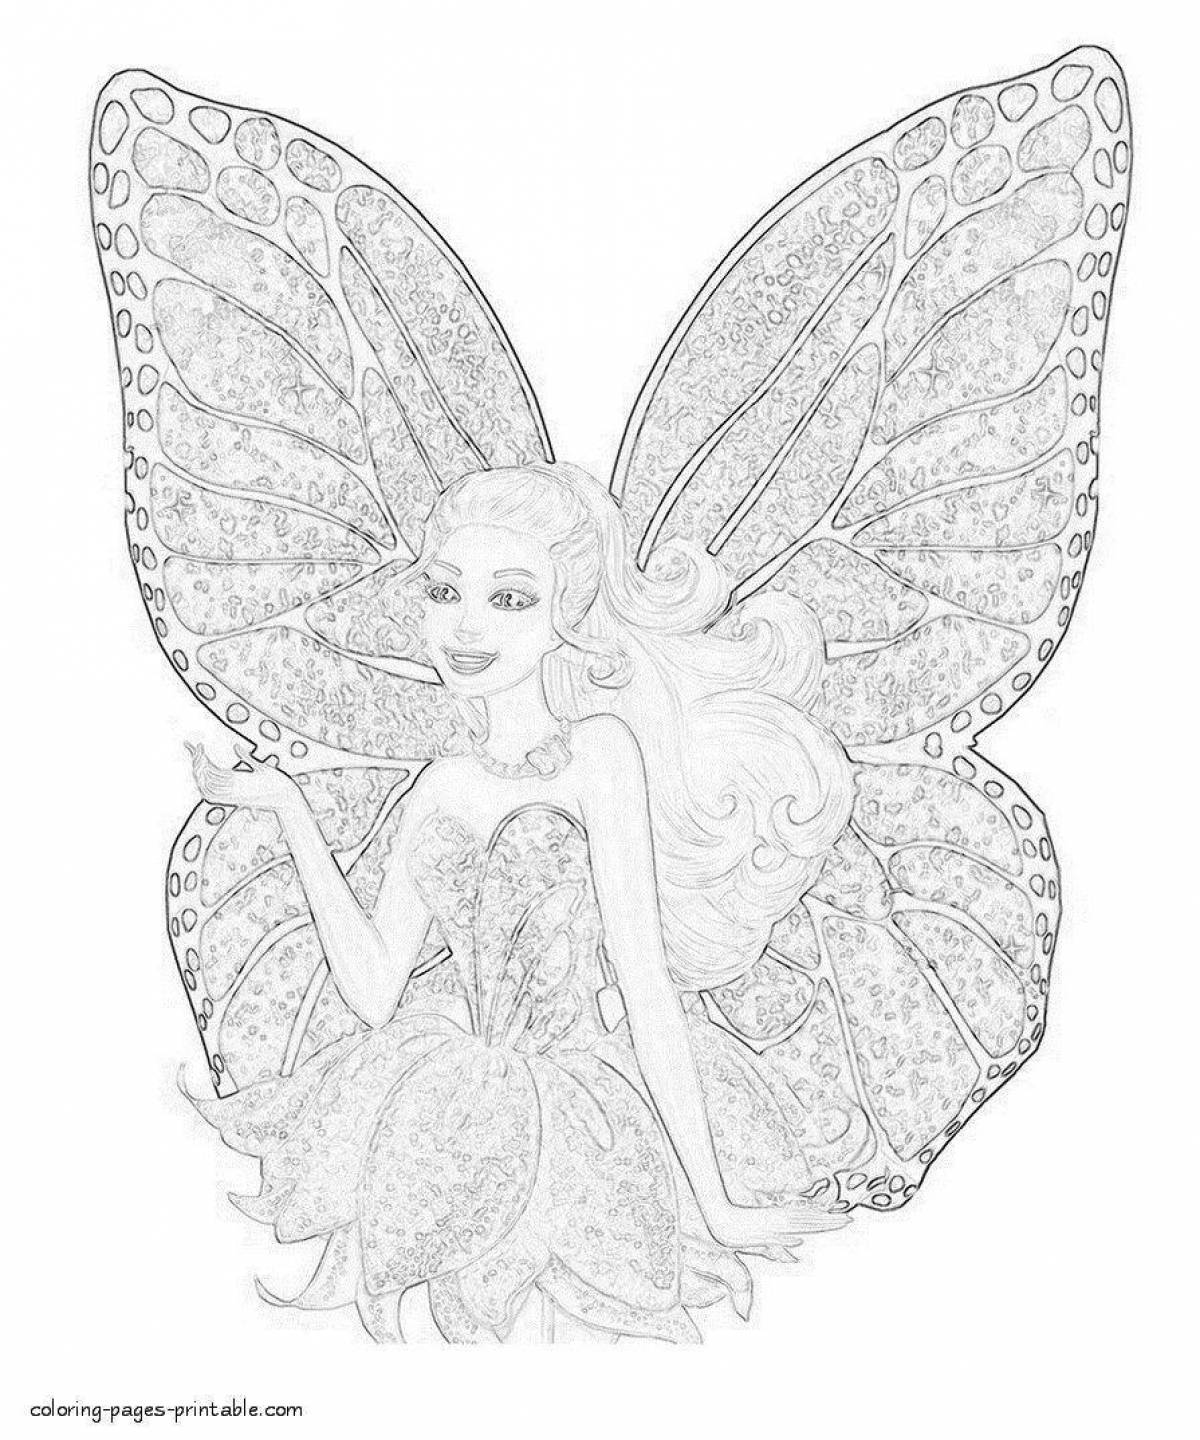 Coloring book glowing fairy barbie